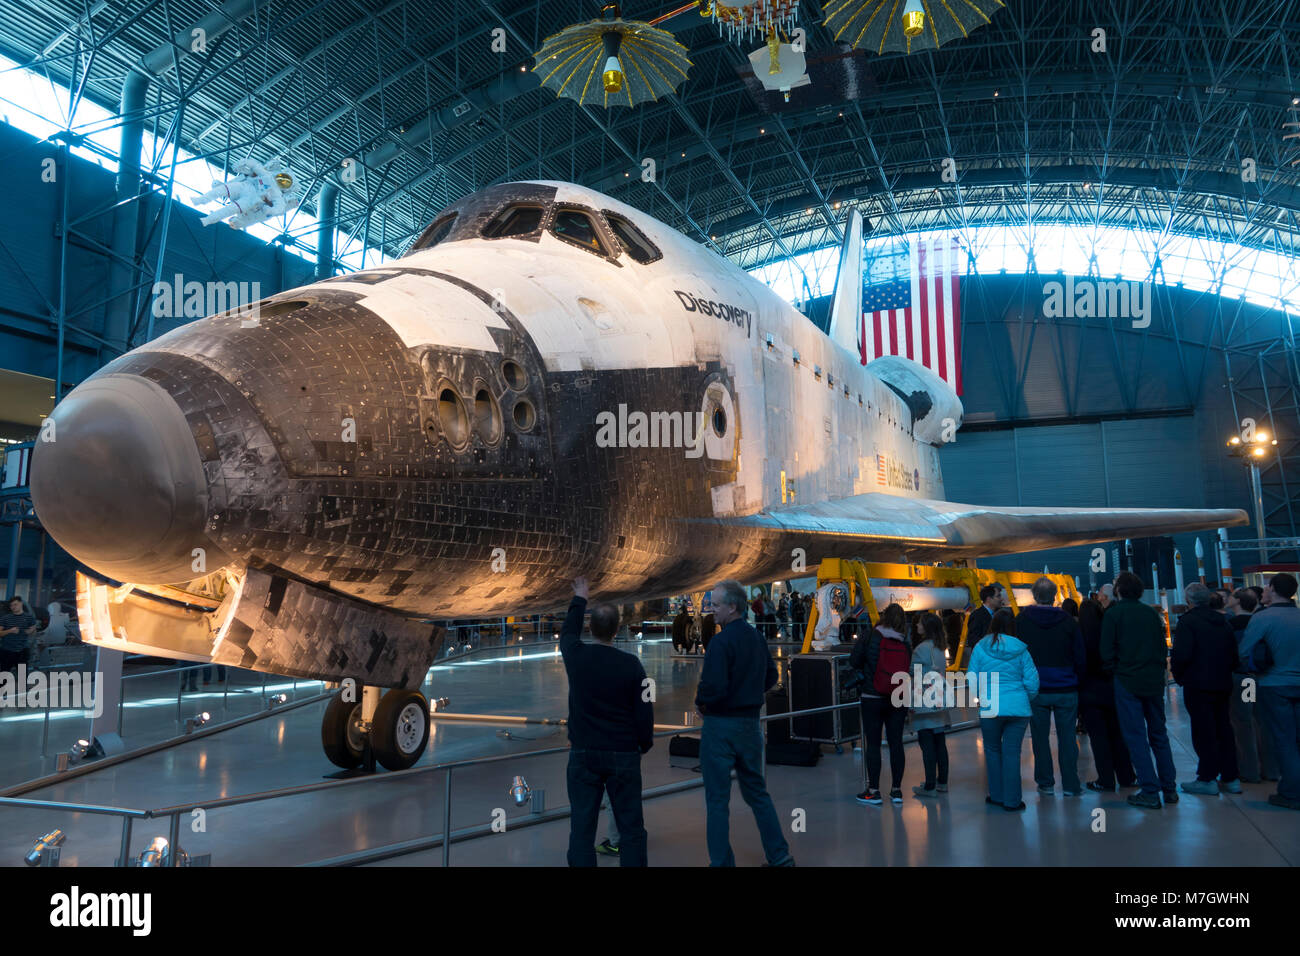 Steven F. Udvar-Hazy Center Smithsonian National Air & Space Museum Chantilly Virginia VA Space Shuttle Discovery sul display Foto Stock